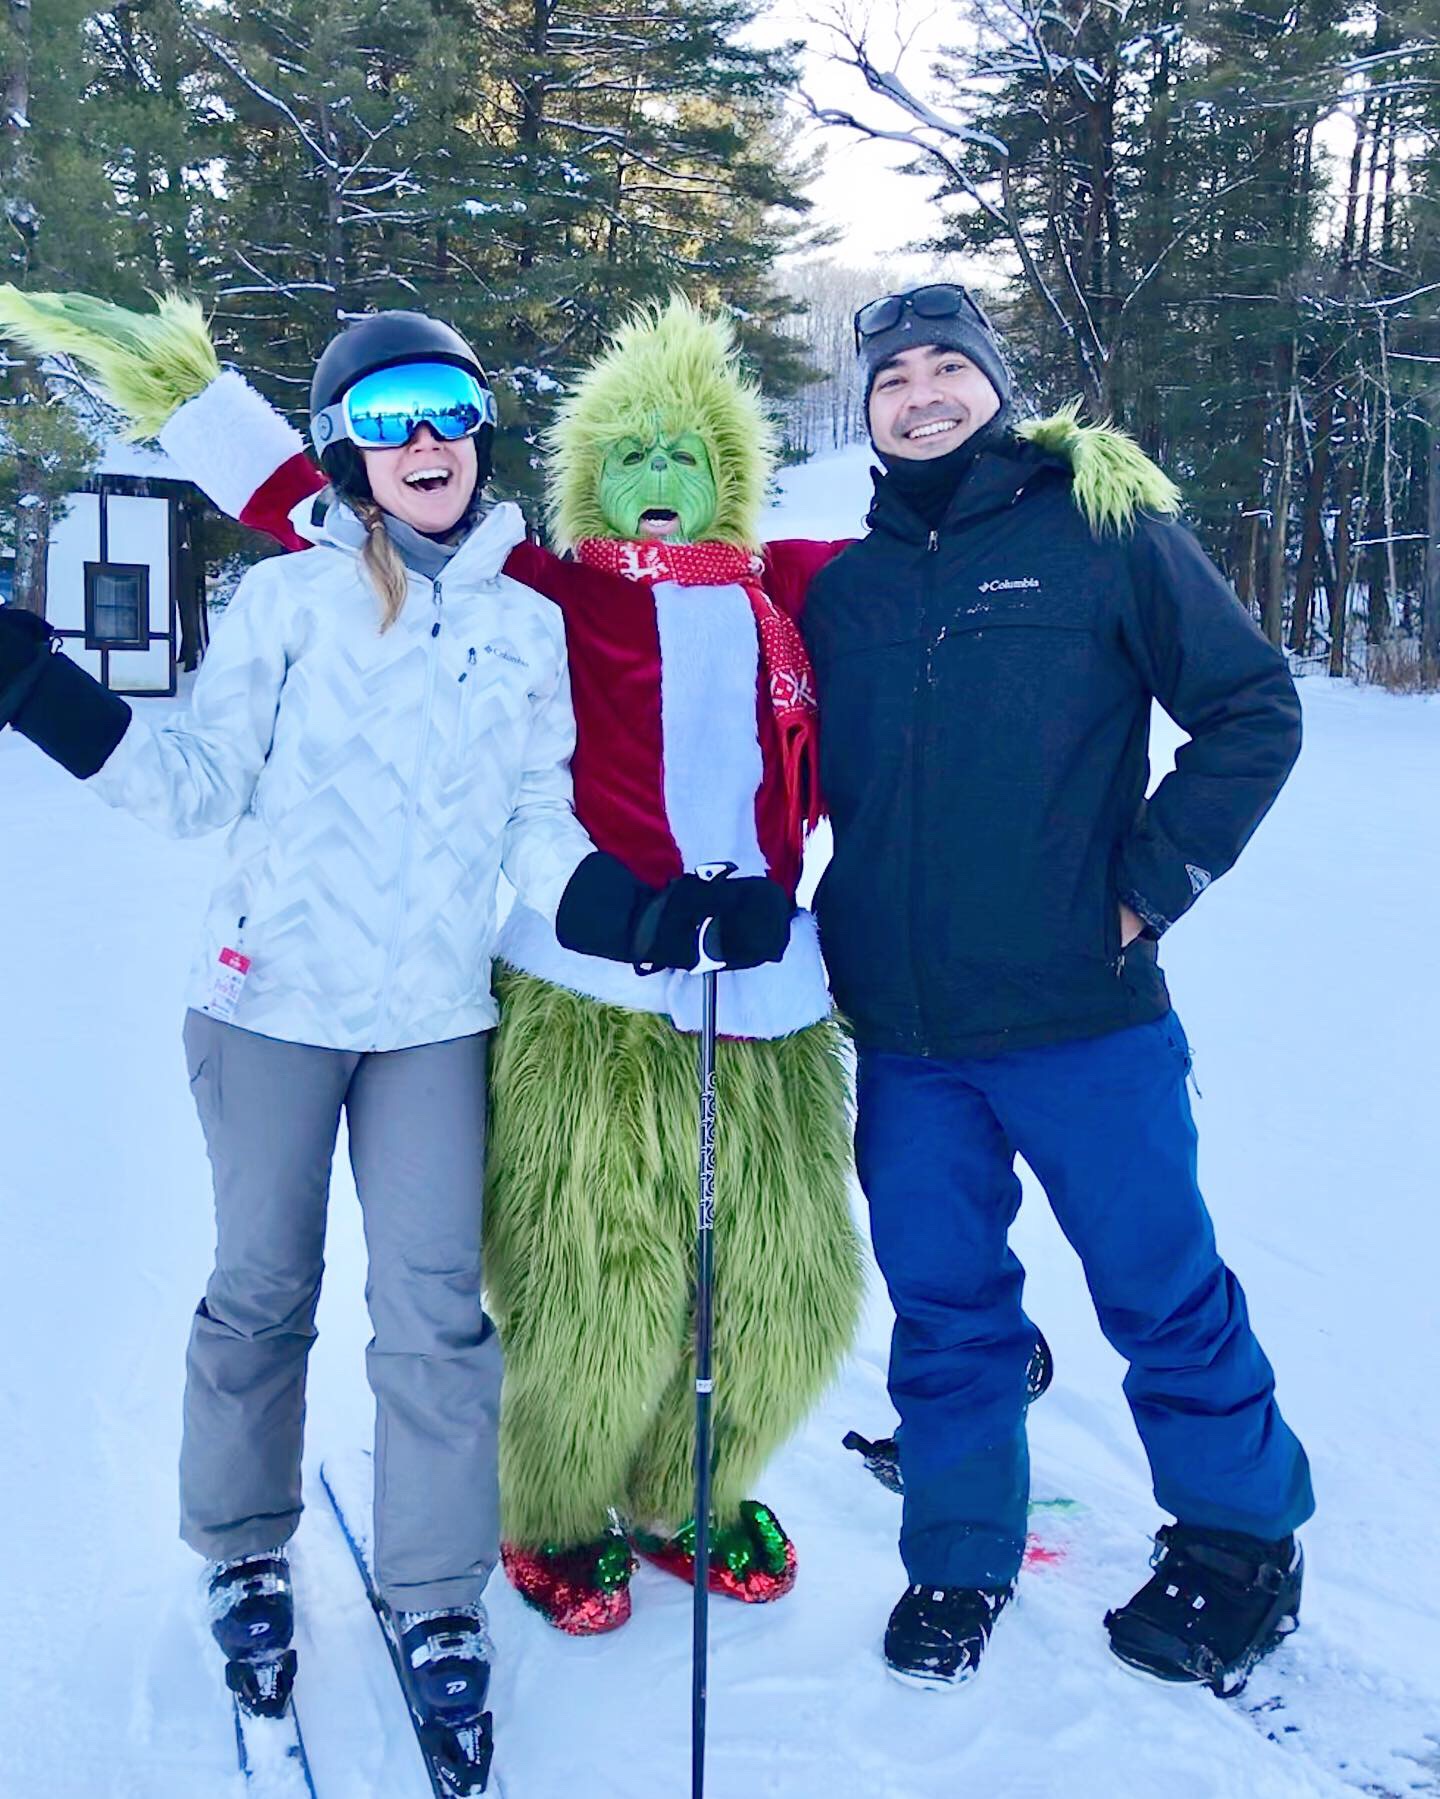 Team members skiing with the grinch